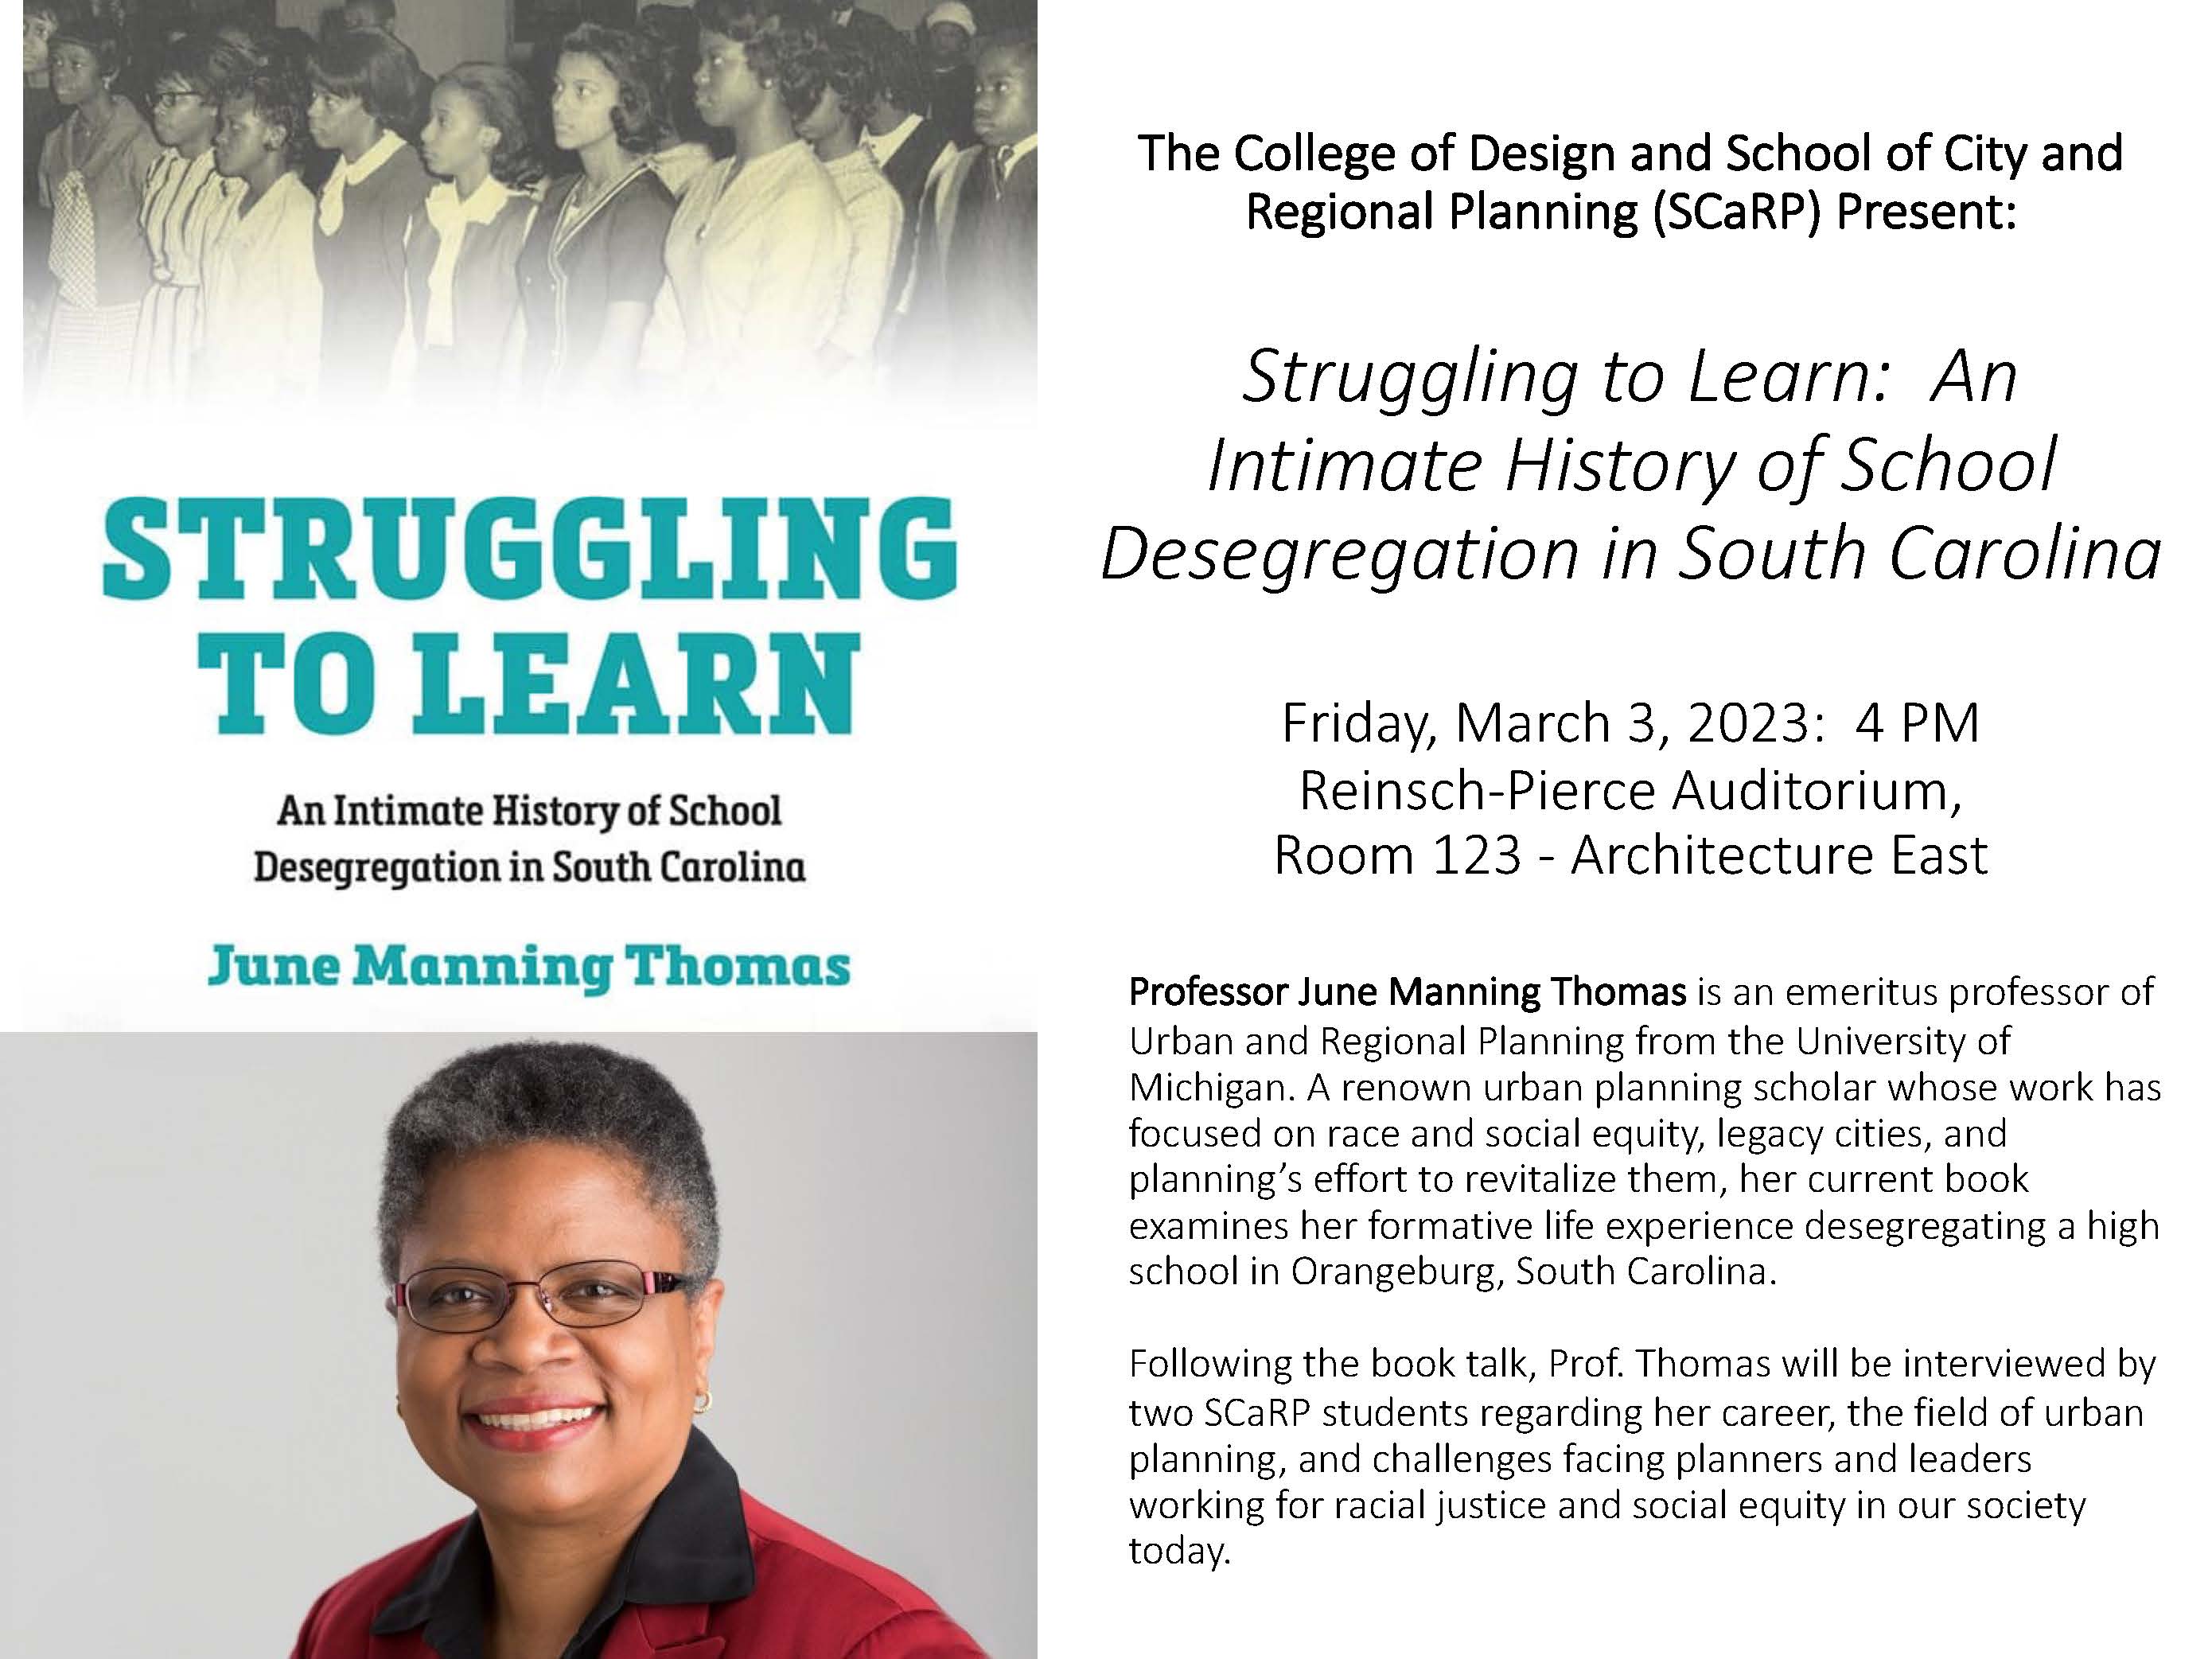 Professor June Manning Thomas will provide her insights into the field of urban planning, and the challenges facing planners and leaders working for racial justice and social equity in our society today, followed by a talk on her current book.